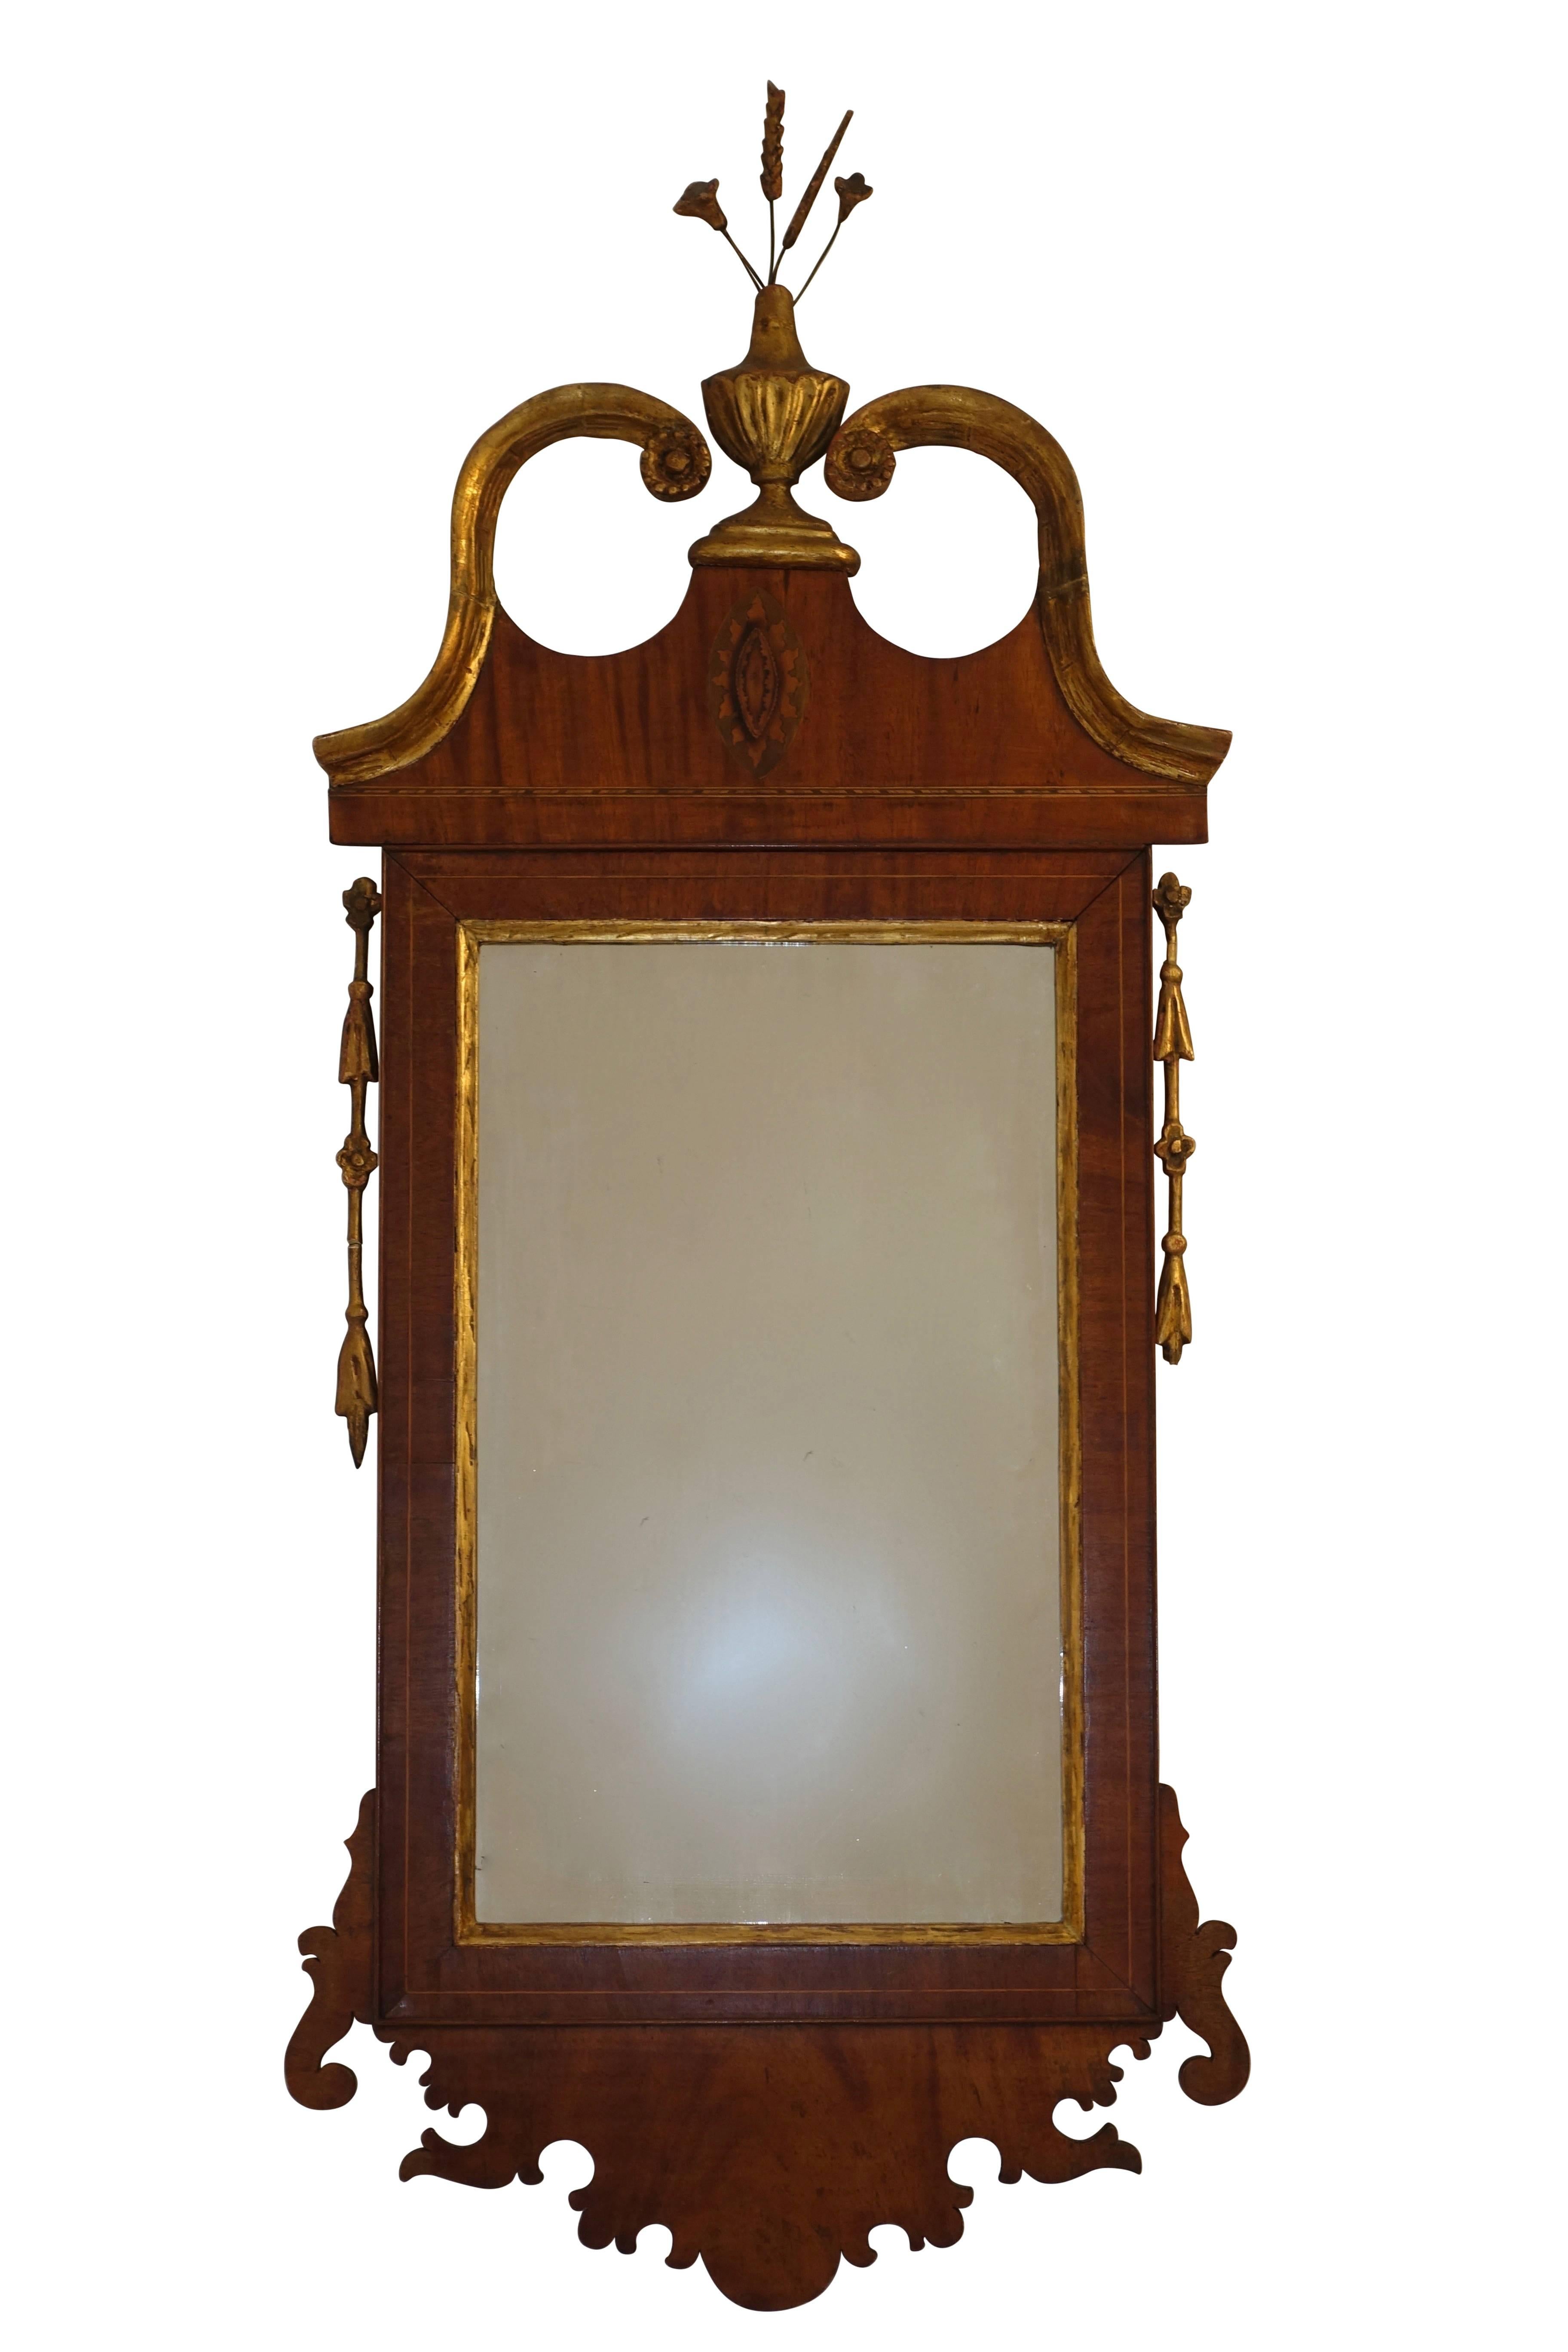 Georgian period mahogany framed mirror with satinwood inlay, having a gilt broken arch pediment centering an urn with floral spray, England, 19th century.